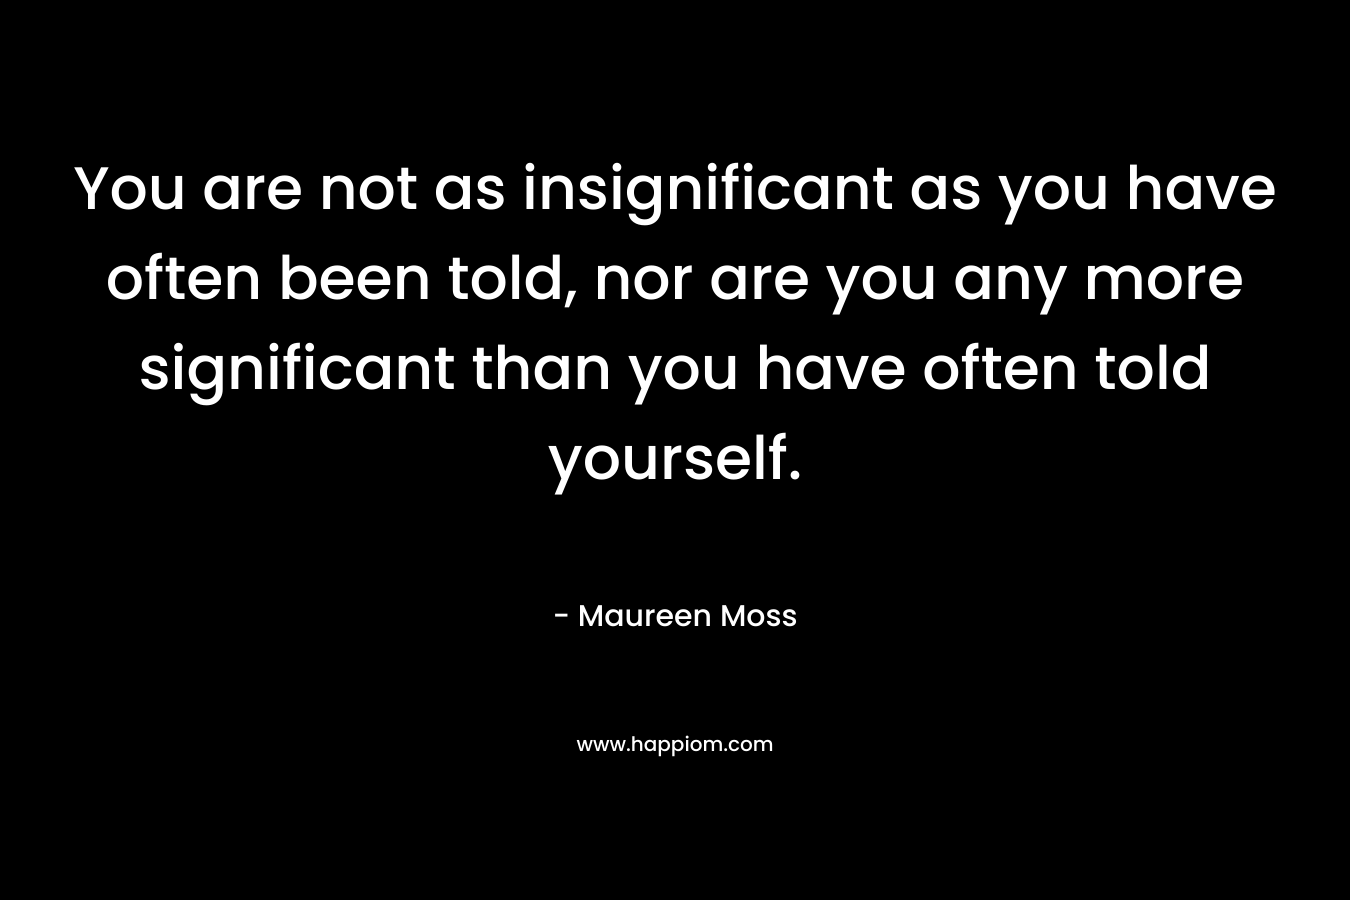 You are not as insignificant as you have often been told, nor are you any more significant than you have often told yourself. – Maureen Moss